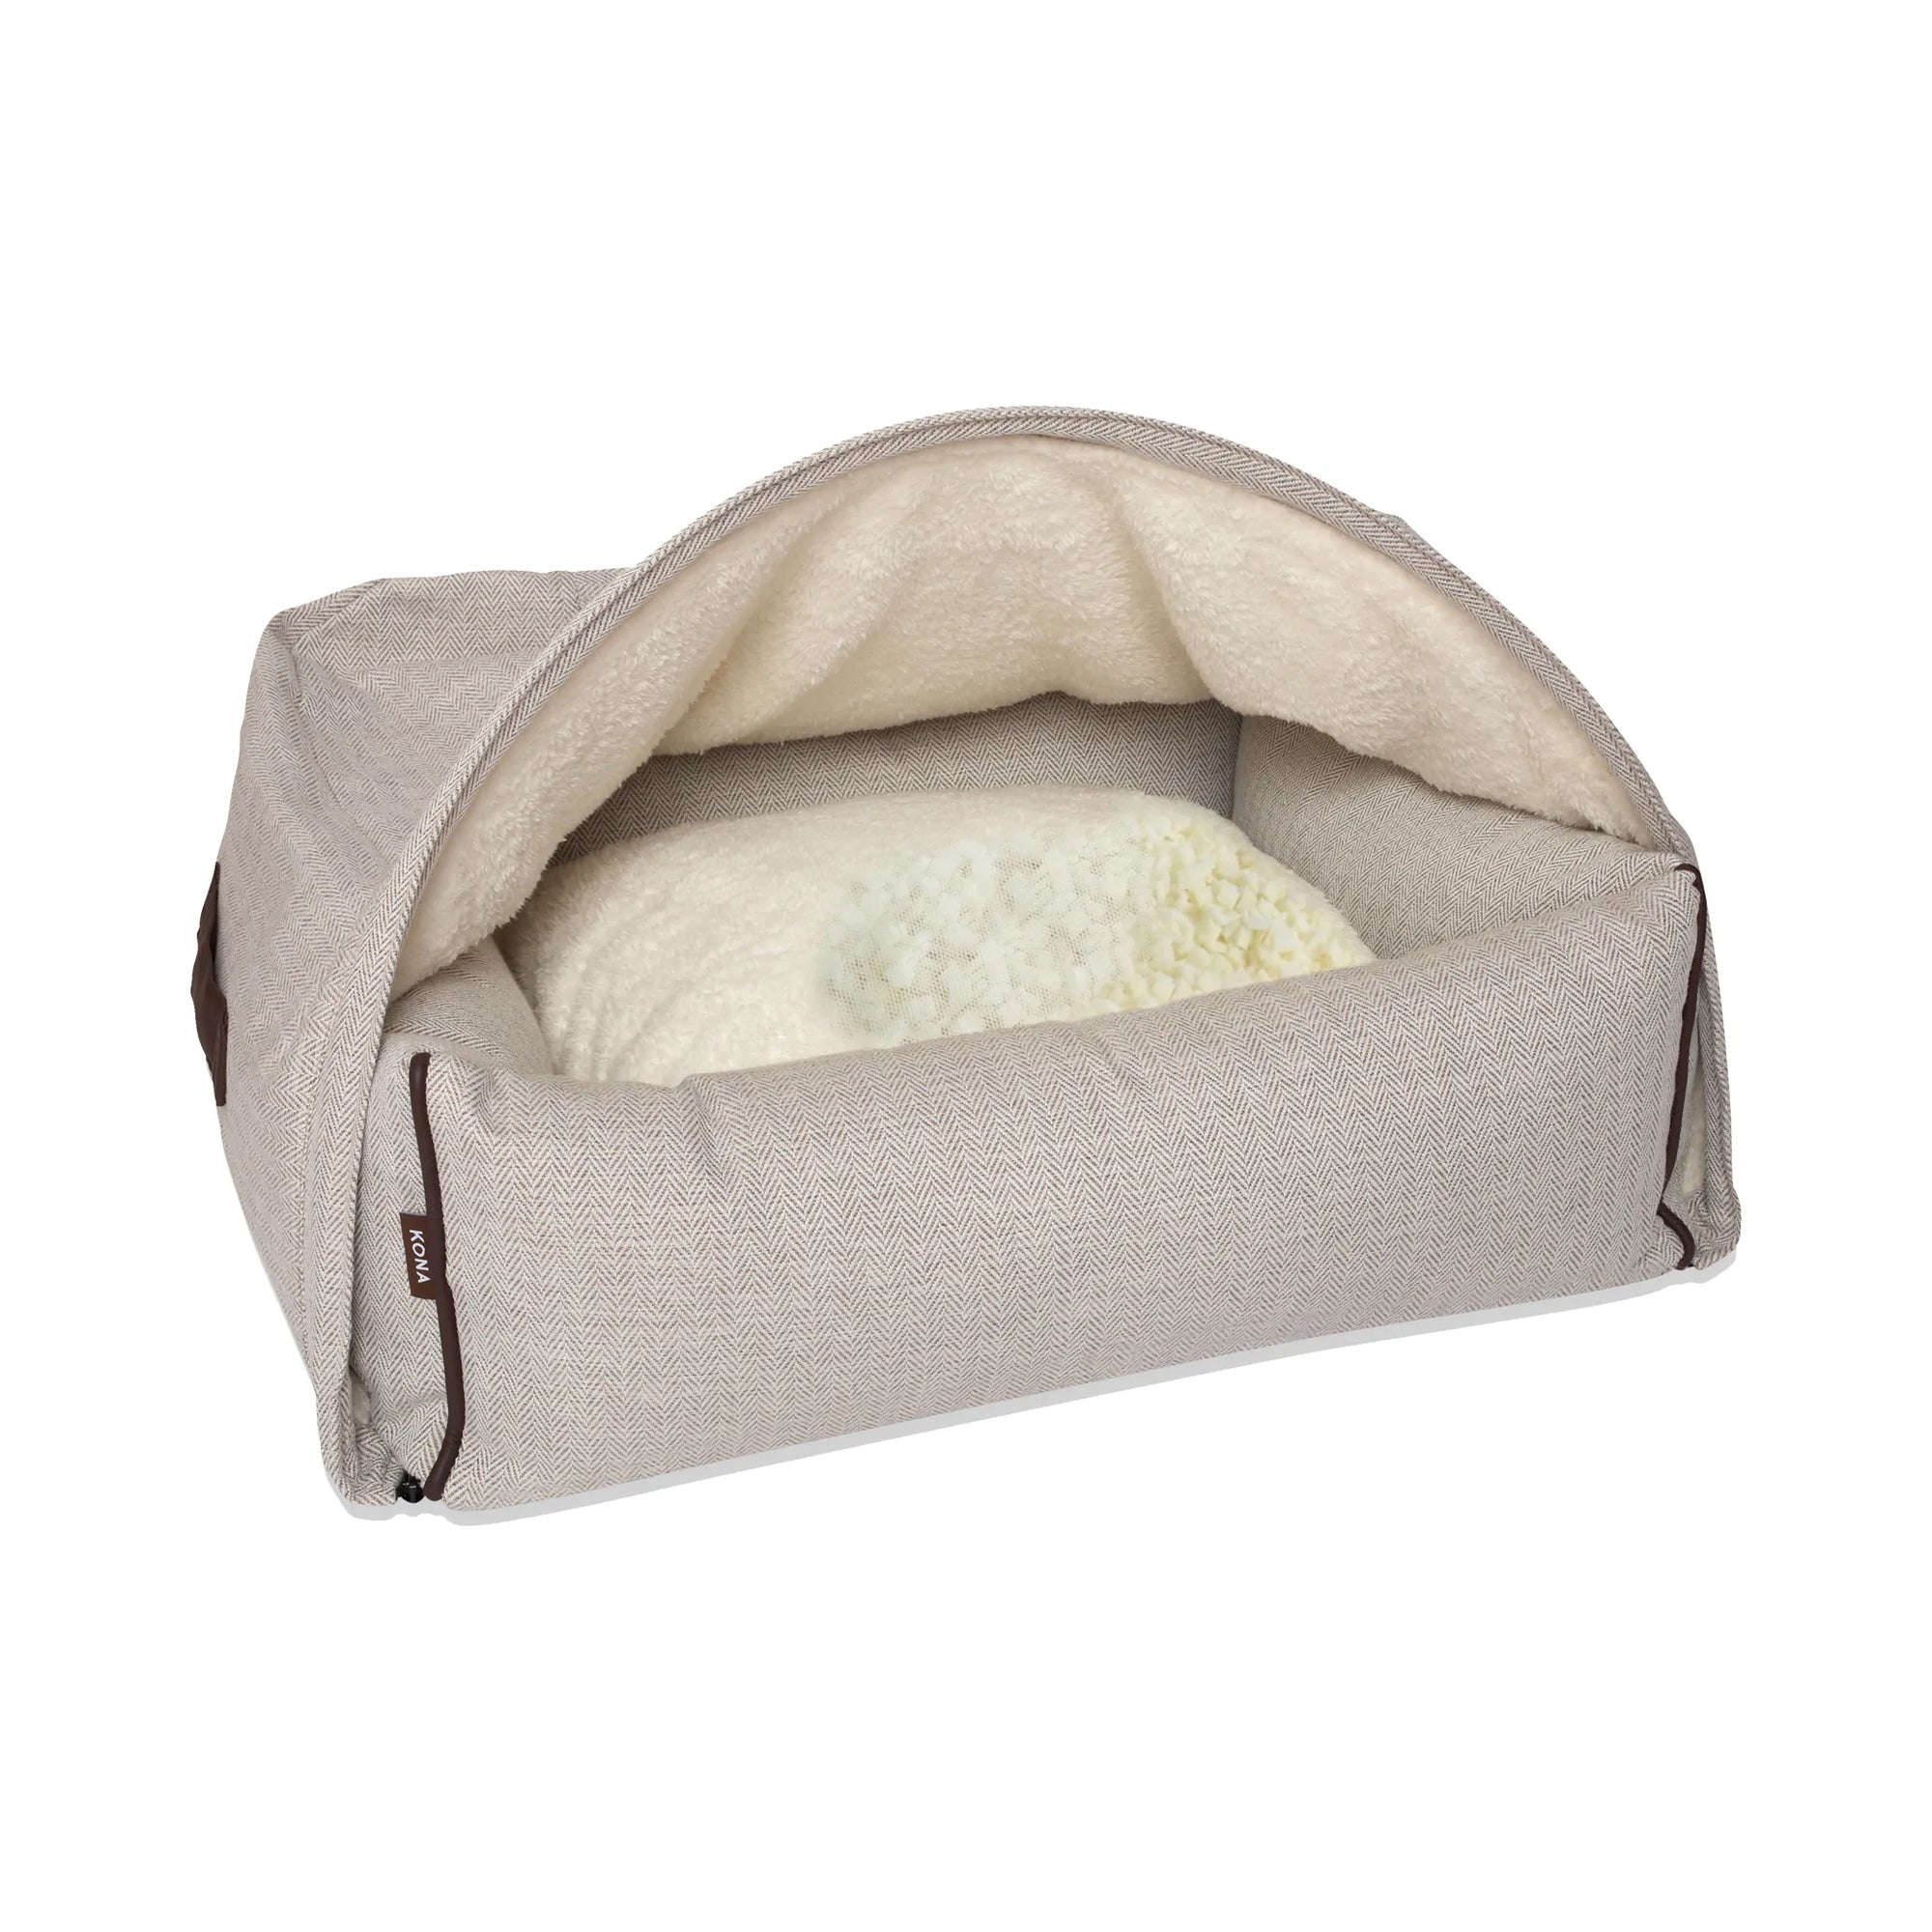 Add an Orthopedic memory foam mattress to any KONA CAVE® Snuggle Cave or Bolster Dog Bed for added comfort and support for your pup of any age. Unlike traditional memory foam, the flexible shredded foam allows air flow through the mattress, keeping your pup cool and comfortable. Simply fluff the pillow to perfection and support your dogs joint health.  